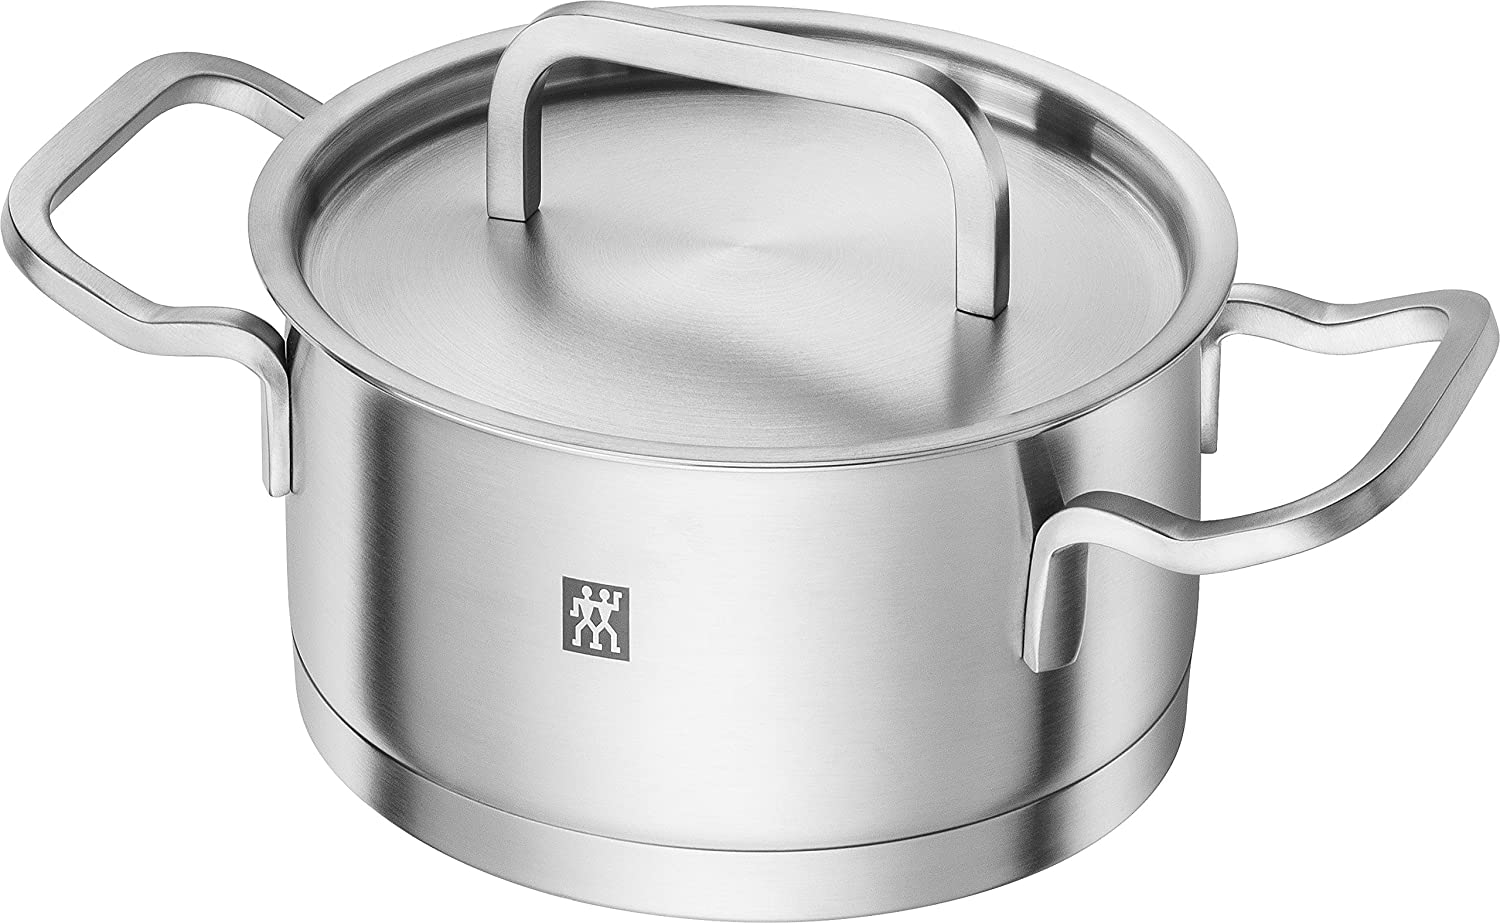 Zwilling Moment 16 cm Stainless Steel Saucepan